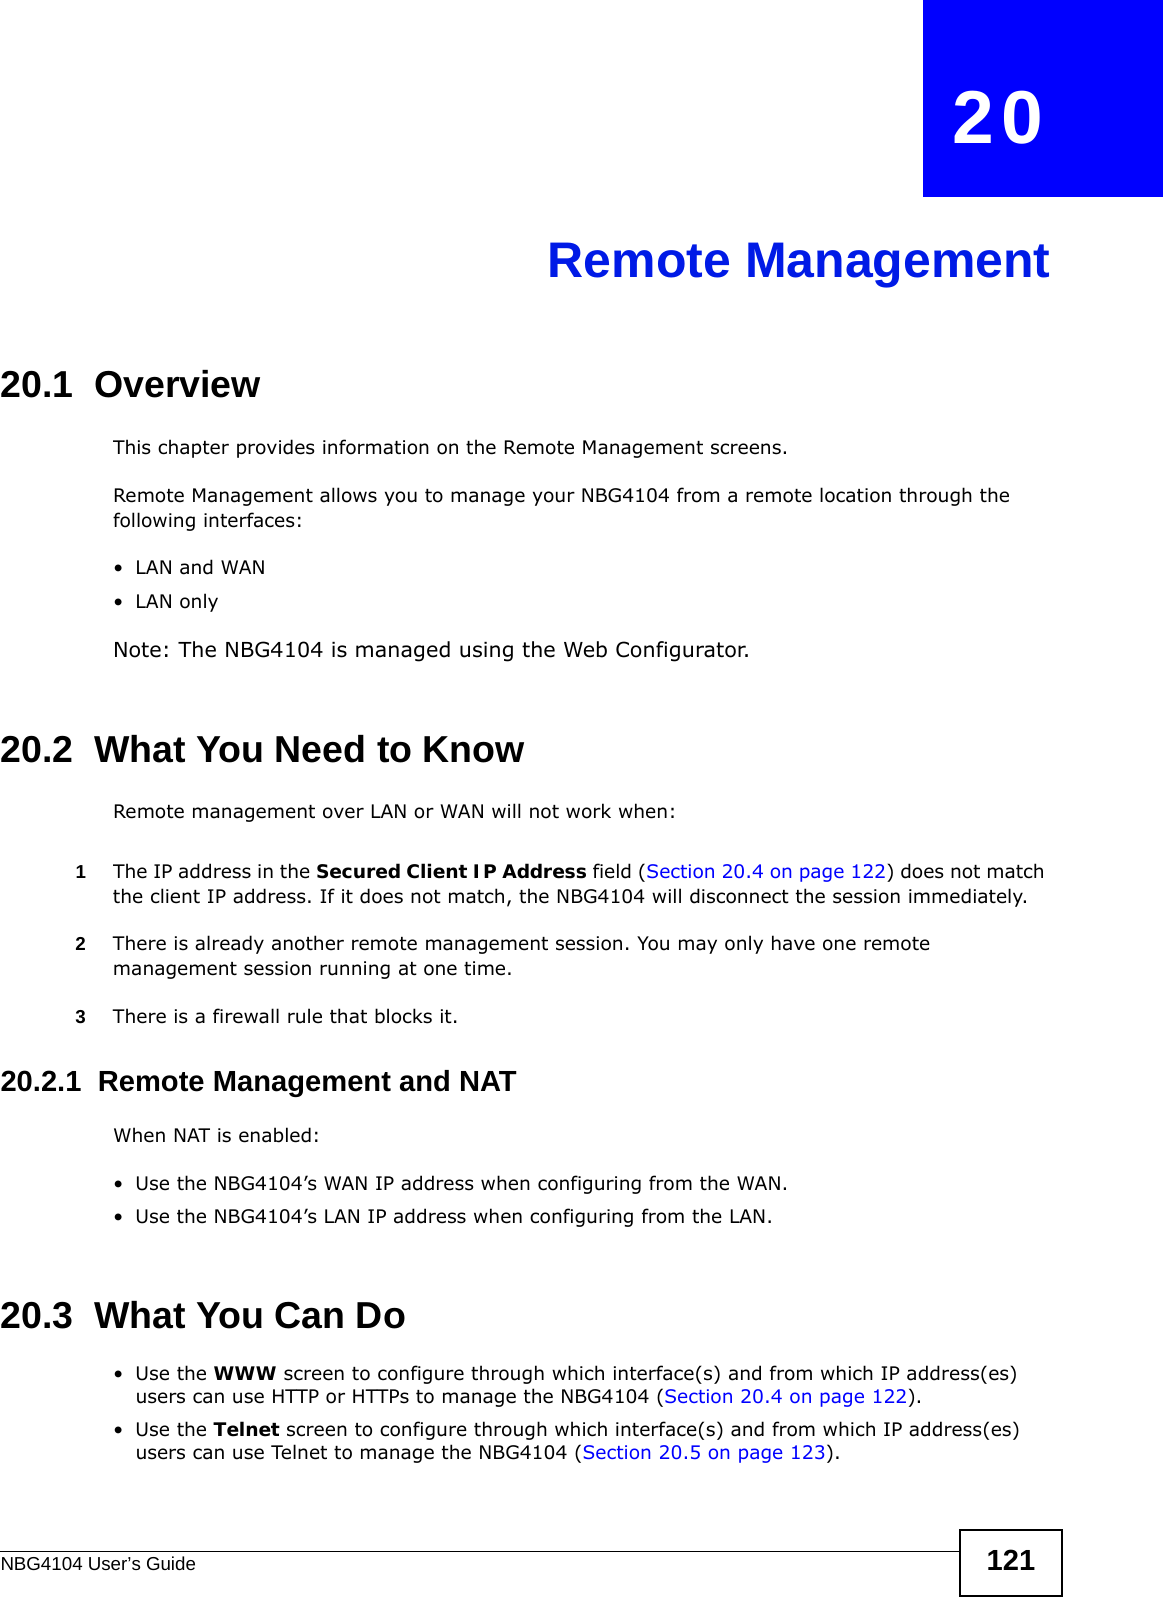 NBG4104 User’s Guide 121CHAPTER   20Remote Management20.1  OverviewThis chapter provides information on the Remote Management screens. Remote Management allows you to manage your NBG4104 from a remote location through the following interfaces:•LAN and WAN•LAN onlyNote: The NBG4104 is managed using the Web Configurator.20.2  What You Need to KnowRemote management over LAN or WAN will not work when:1The IP address in the Secured Client IP Address field (Section 20.4 on page 122) does not match the client IP address. If it does not match, the NBG4104 will disconnect the session immediately.2There is already another remote management session. You may only have one remote management session running at one time.3There is a firewall rule that blocks it.20.2.1  Remote Management and NATWhen NAT is enabled:• Use the NBG4104’s WAN IP address when configuring from the WAN. • Use the NBG4104’s LAN IP address when configuring from the LAN.20.3  What You Can Do•Use the WWW screen to configure through which interface(s) and from which IP address(es) users can use HTTP or HTTPs to manage the NBG4104 (Section 20.4 on page 122).•Use the Telnet screen to configure through which interface(s) and from which IP address(es) users can use Telnet to manage the NBG4104 (Section 20.5 on page 123).